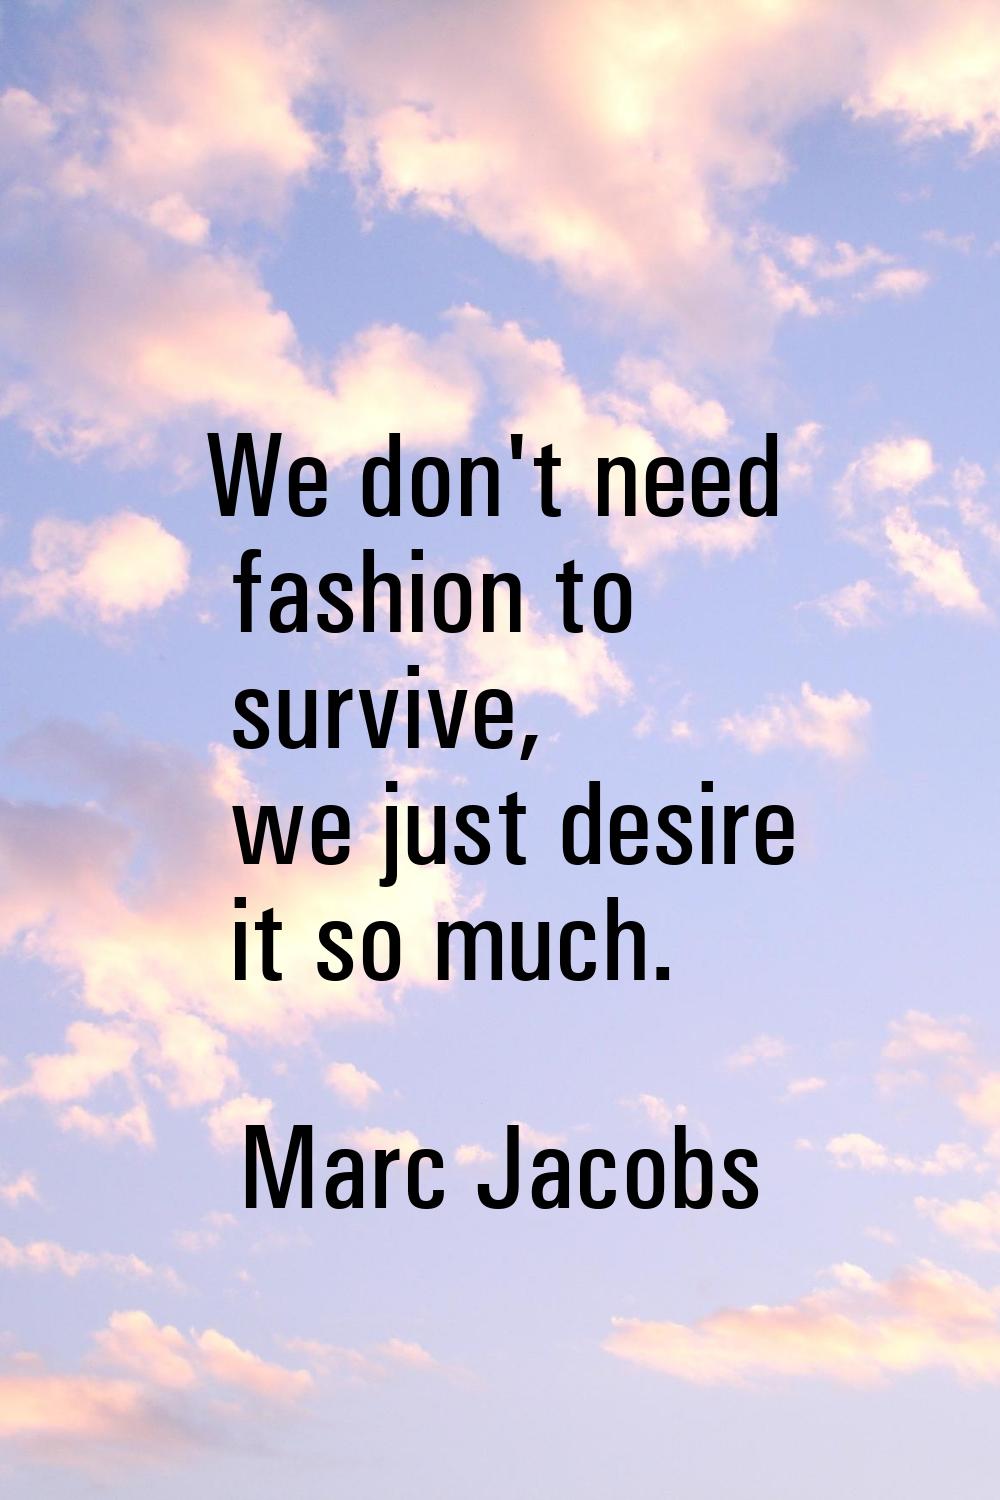 We don't need fashion to survive, we just desire it so much.